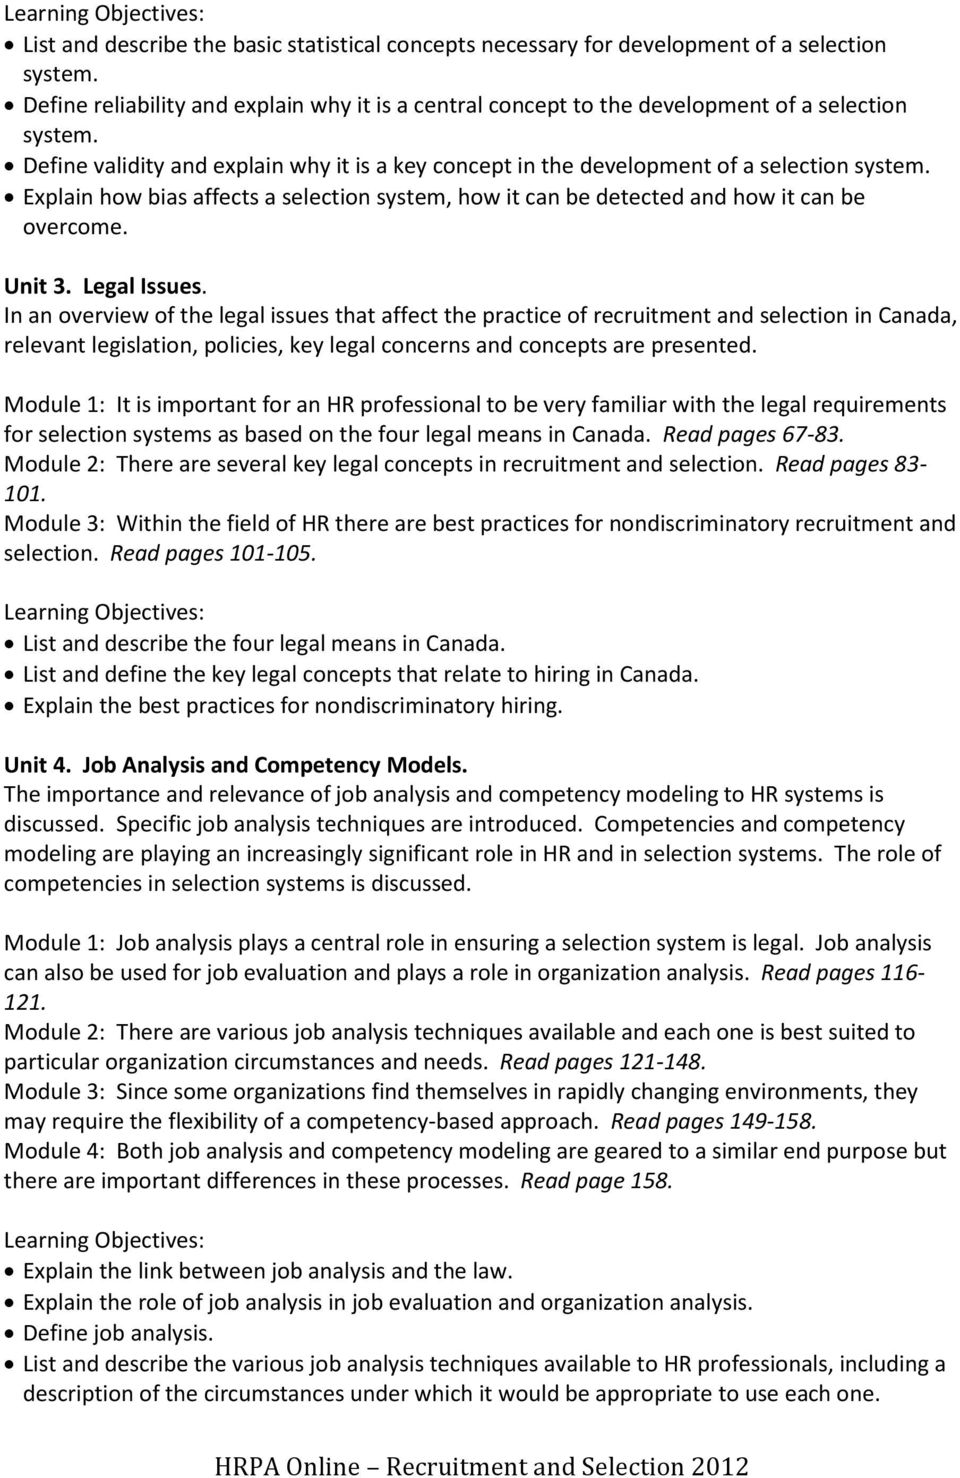 Legal Issues. In an overview of the legal issues that affect the practice of recruitment and selection in Canada, relevant legislation, policies, key legal concerns and concepts are presented.